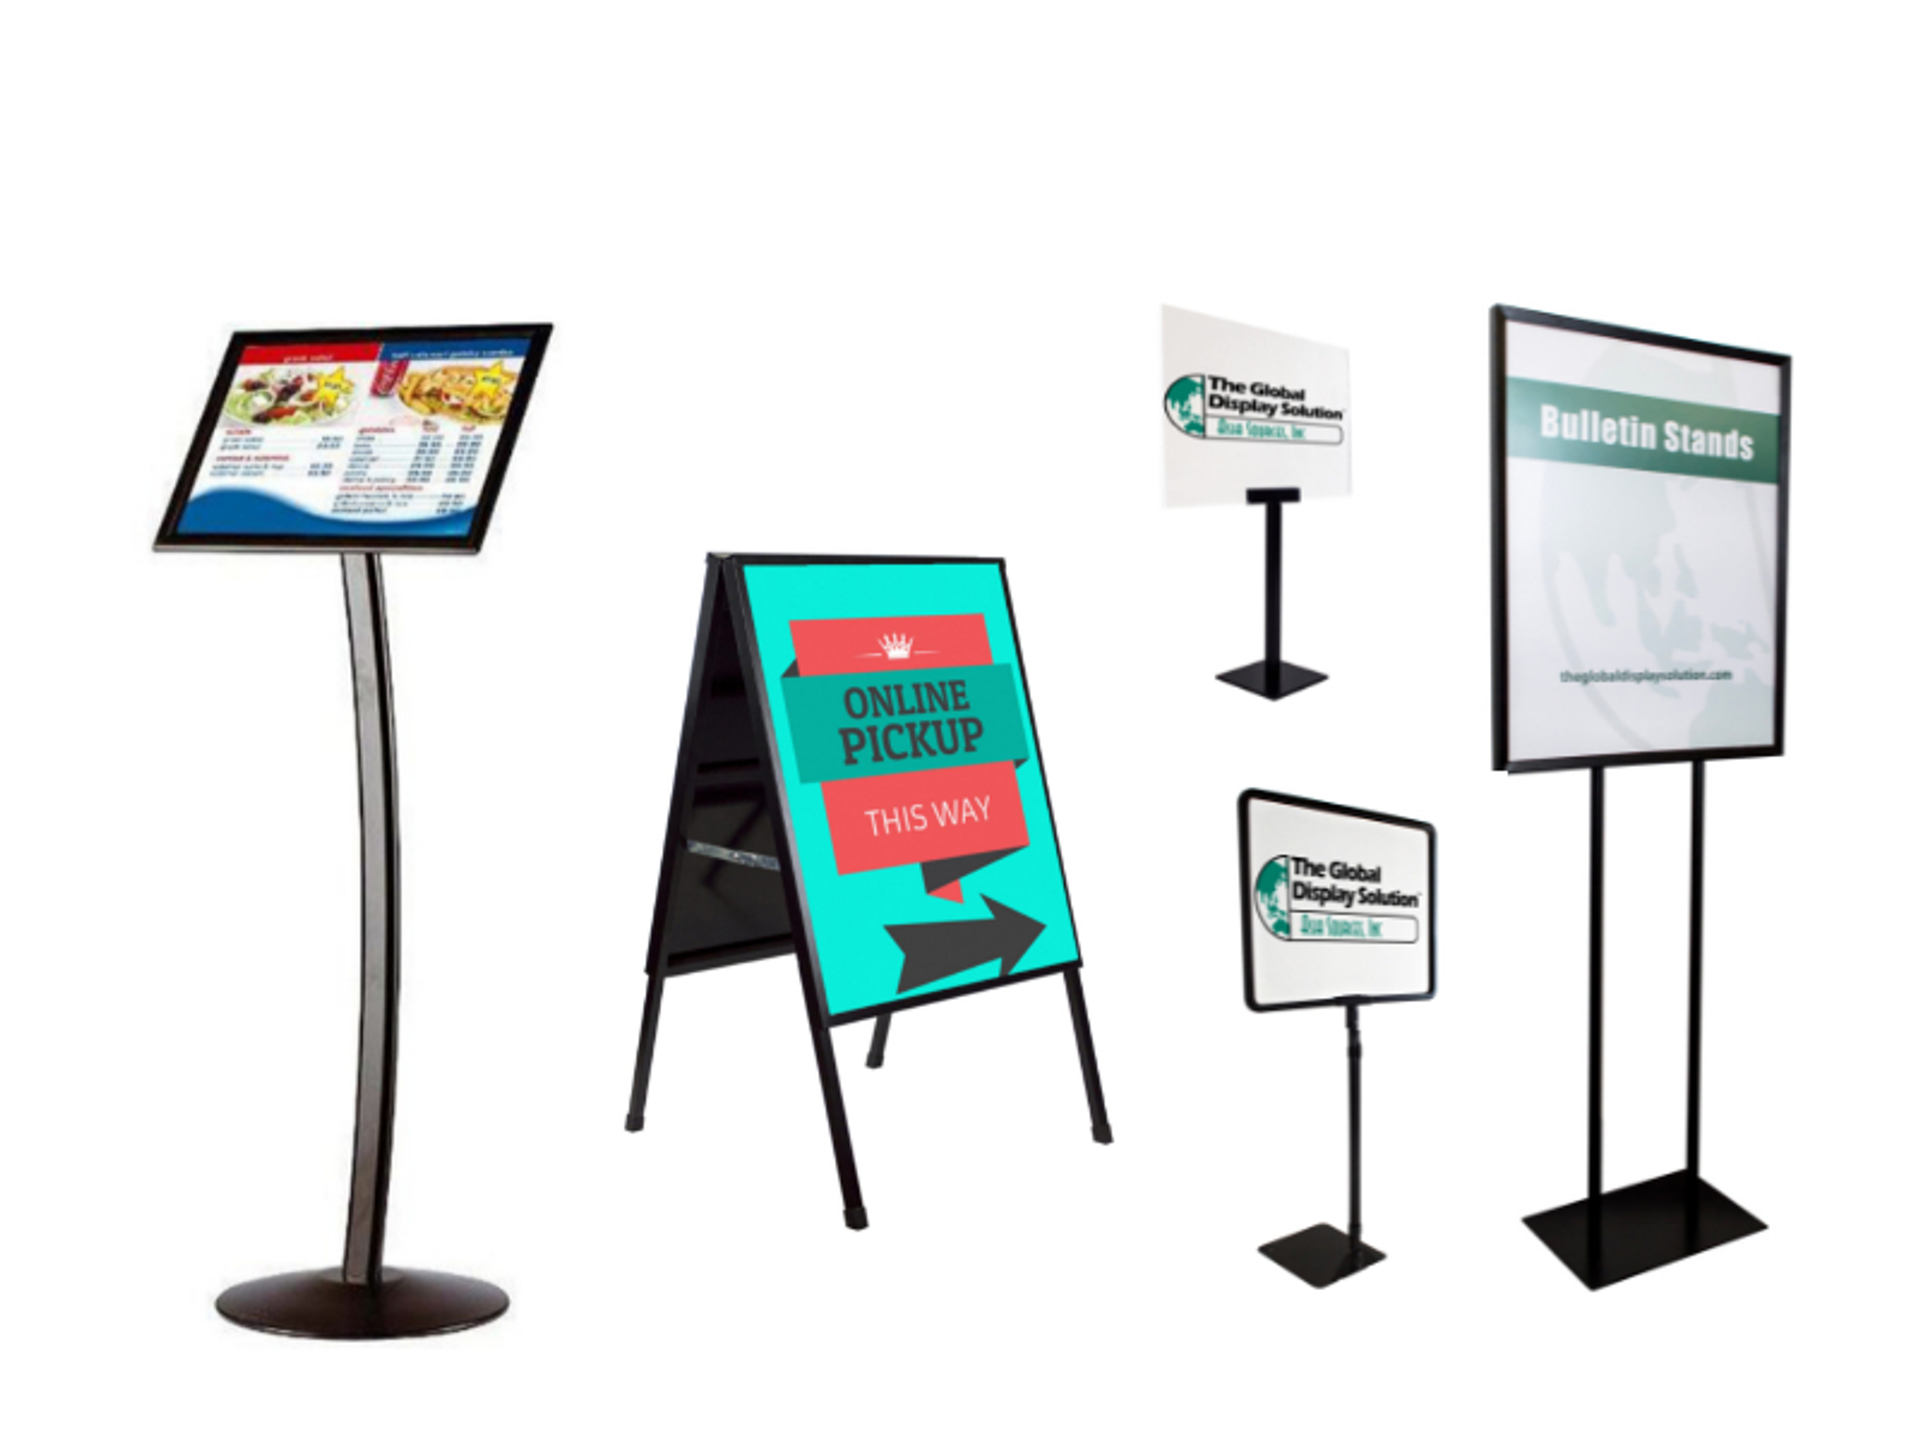 The Key Elements of Visual Merchandising - The Global Display Solution™